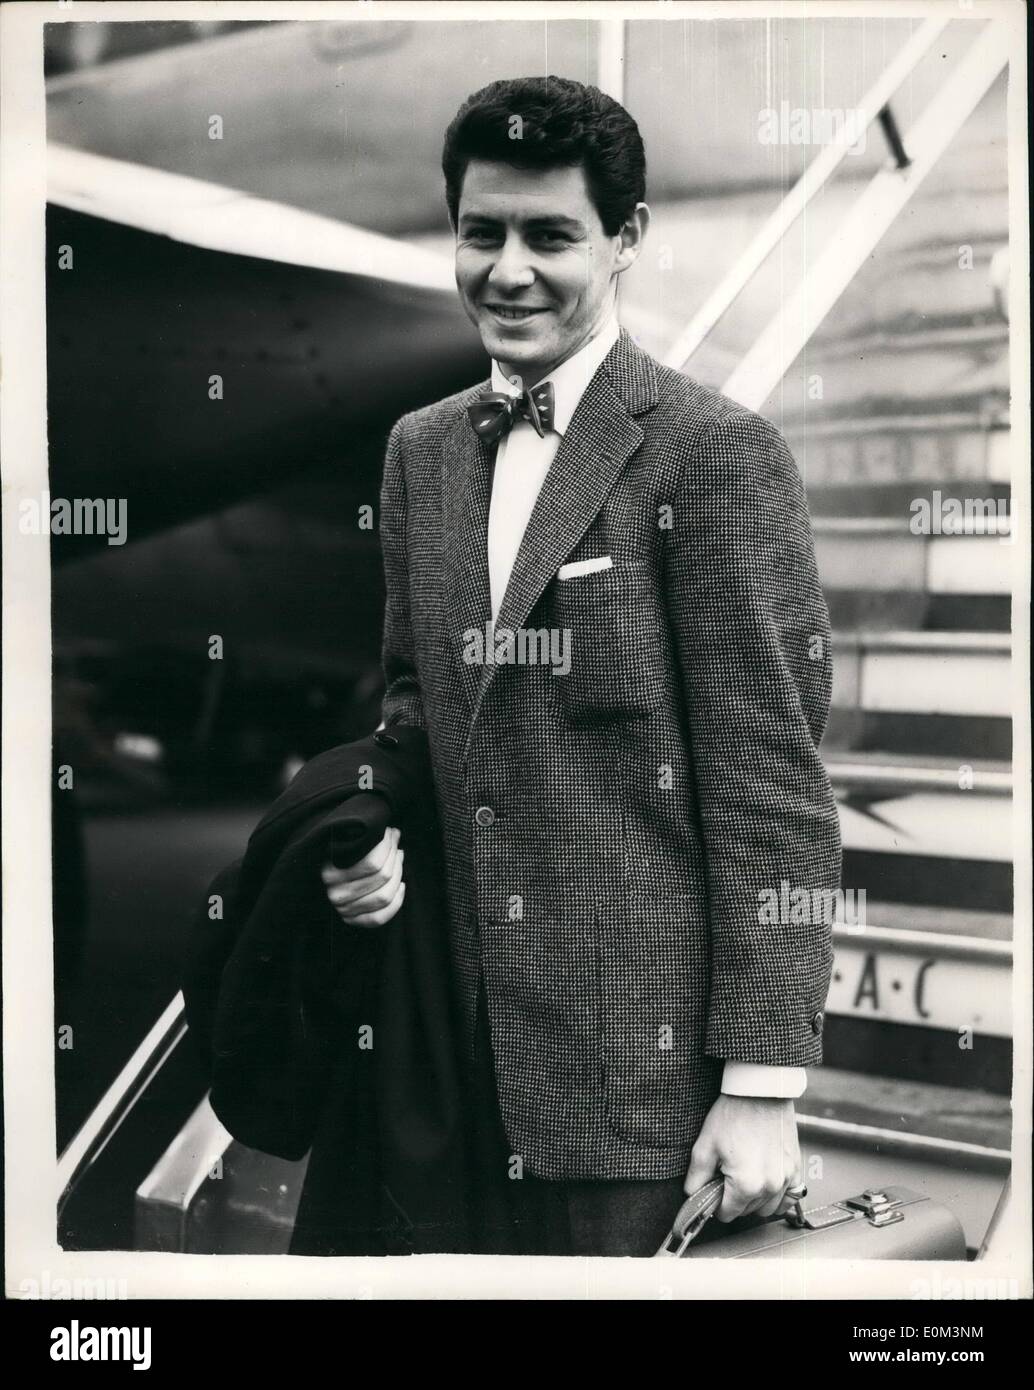 May 05, 1953 - American Singer arrives in London Eddie Fisher to appear at Palladium: Eddie Fisher 24 the latest idol of the U Stock Photo